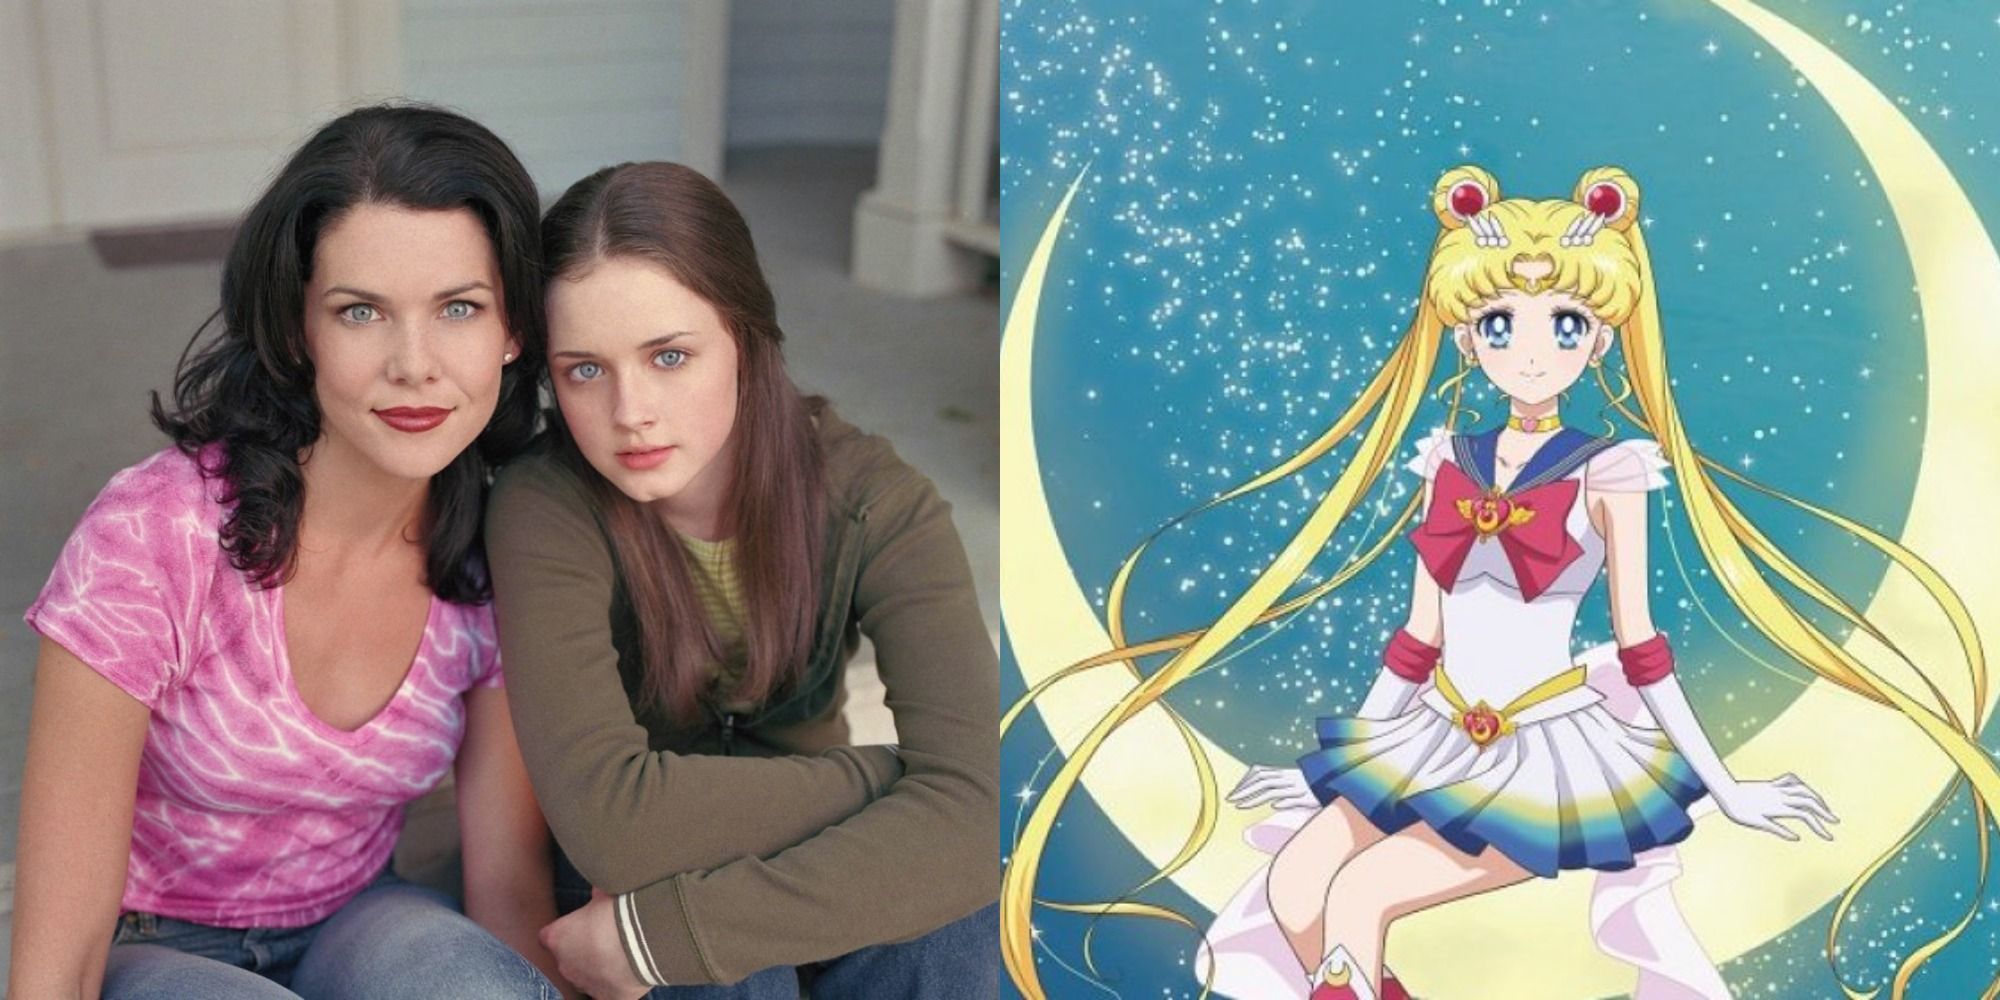 Split image showing Lorelai and Rory, and Sailor Moon sitting on the moon